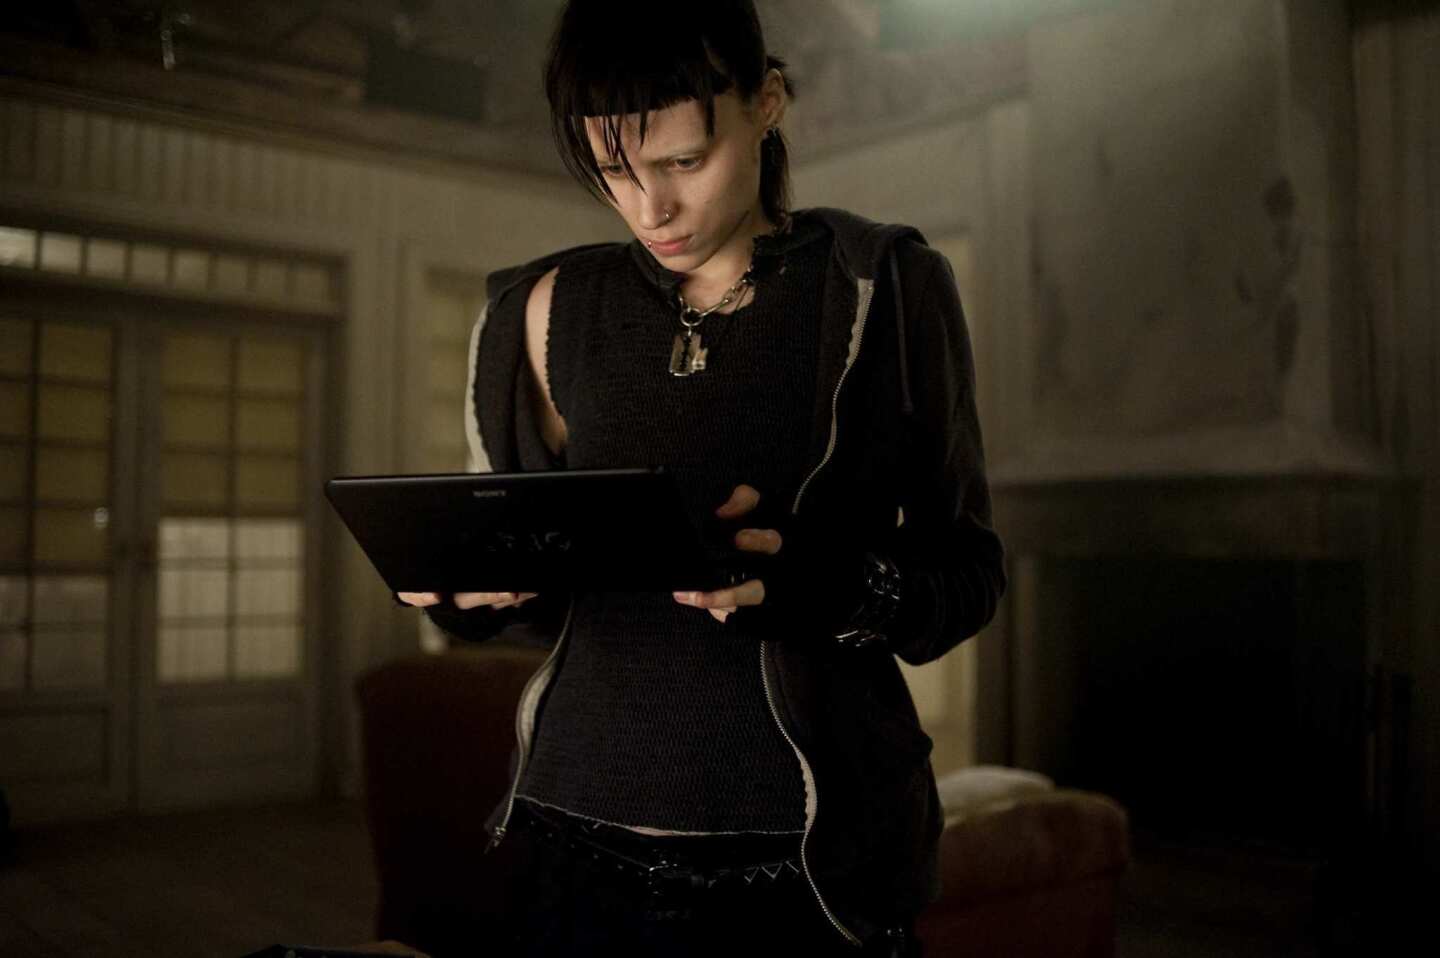 Trish Summerville for "The Girl With the Dragon Tattoo."